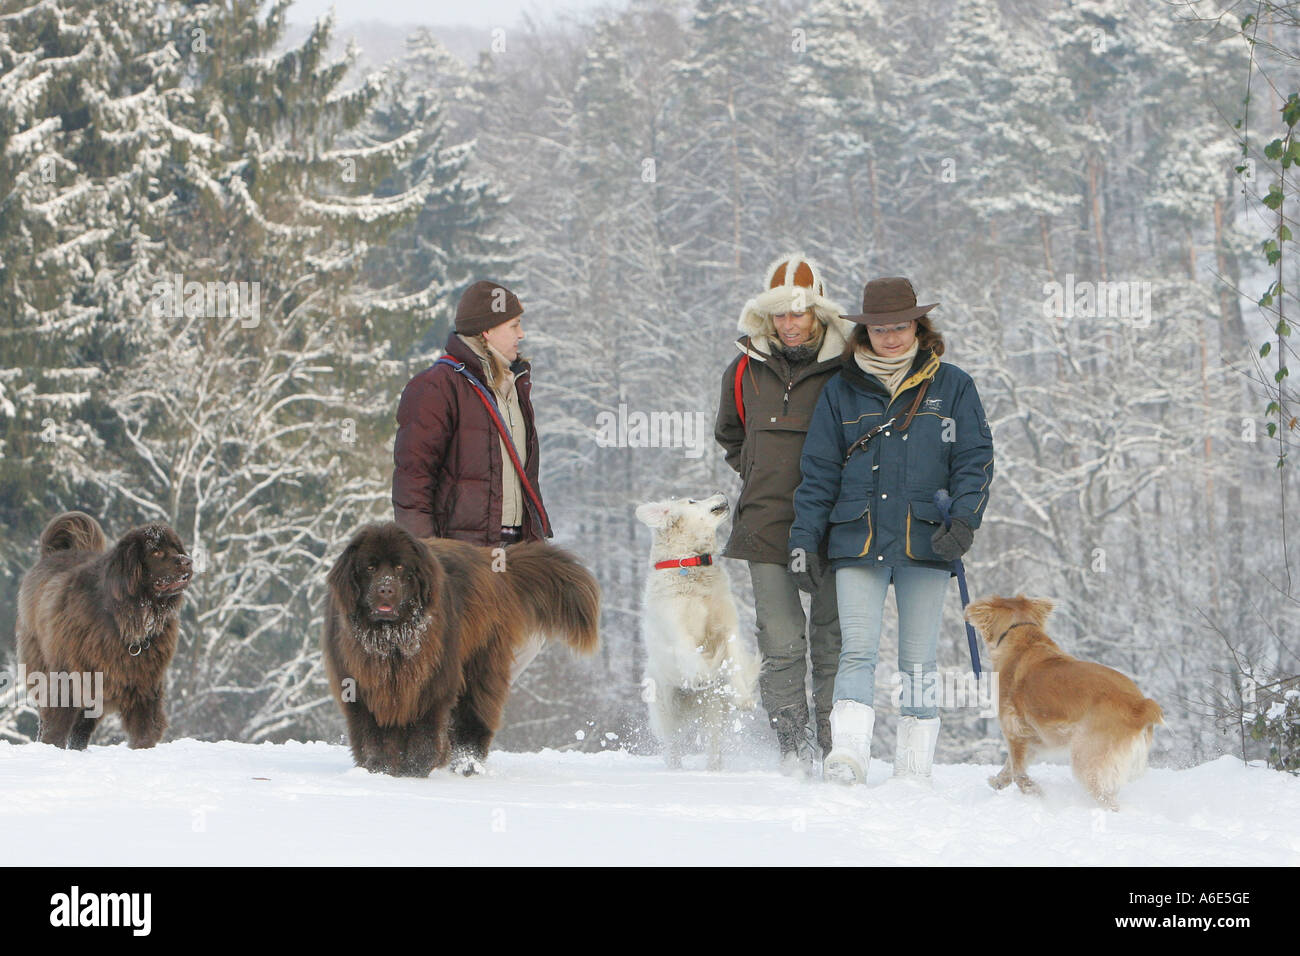 DEU, Federal Republic of Germany, Heidelberg, walking in the snow with dogs Stock Photo